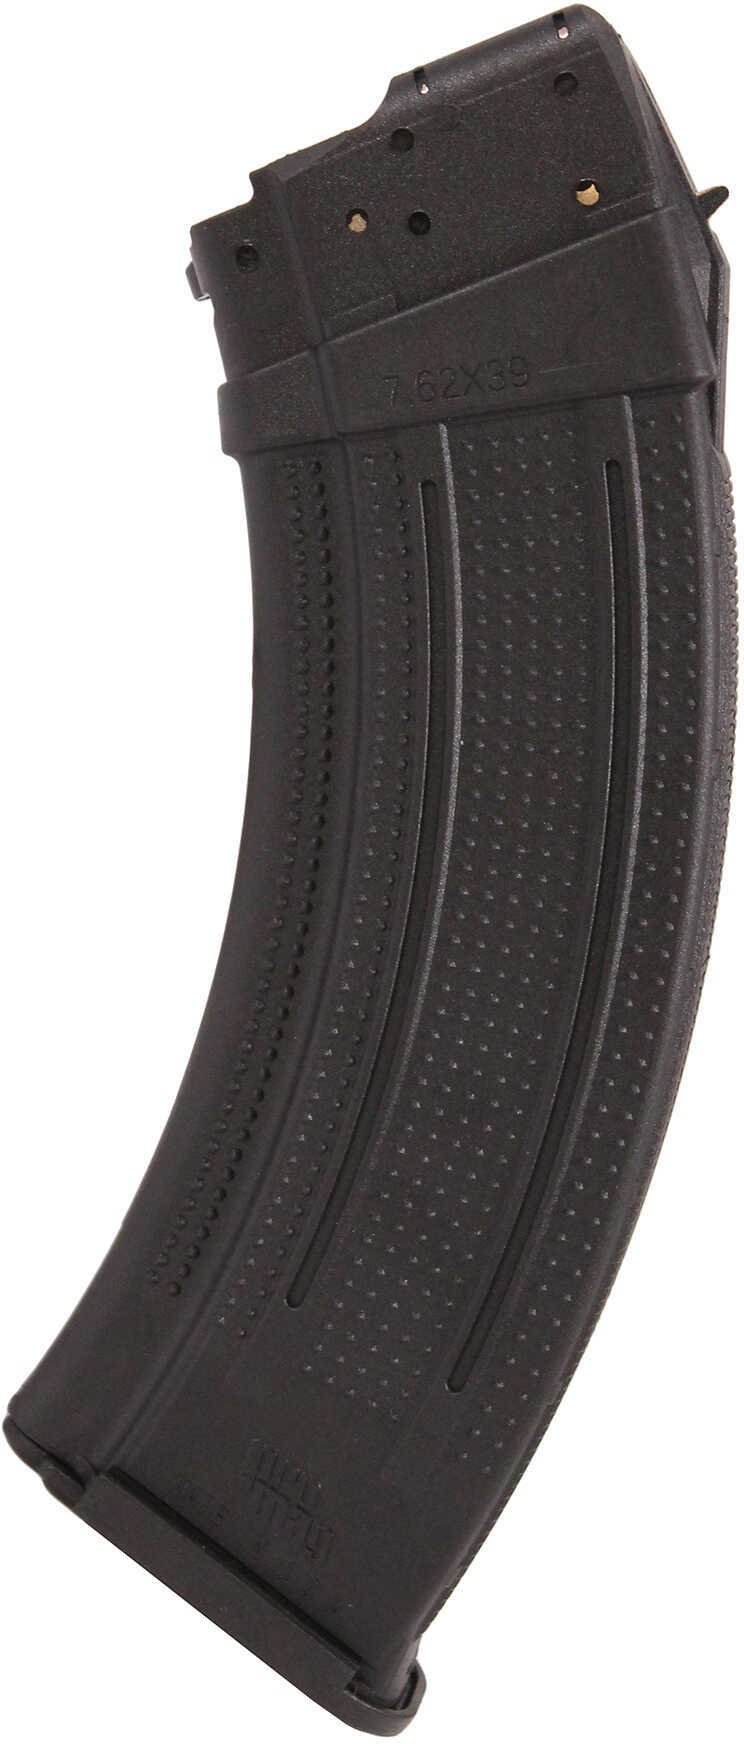 Promag AK-47 Magazine 7.62X39mm Steel Lined Polymer 30/Rd